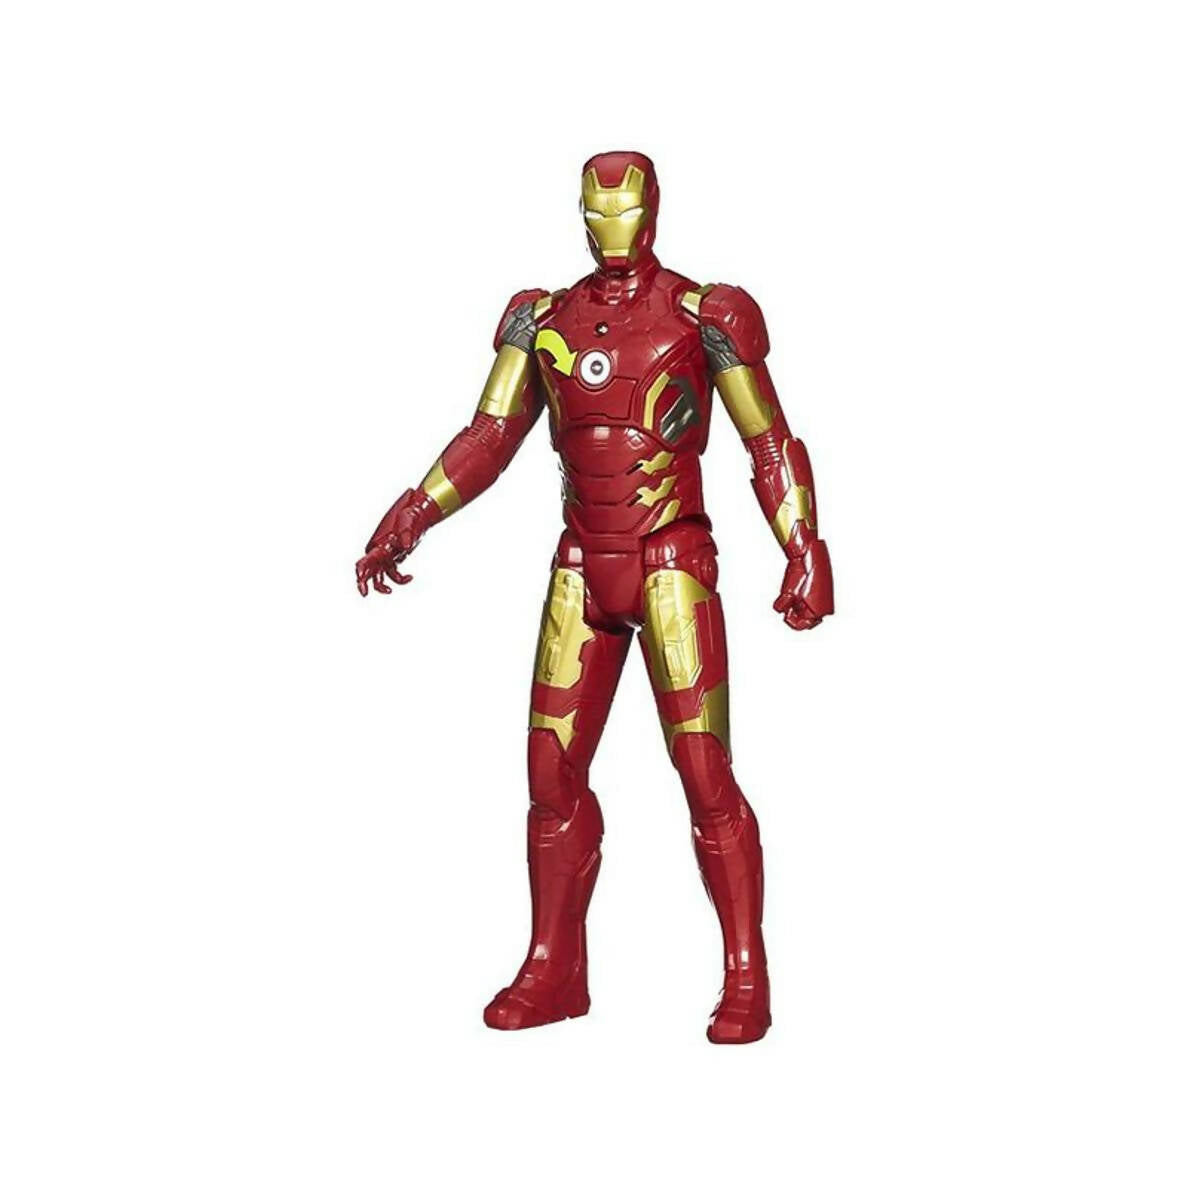 Avengers: Age Of Ultron - Iron Man Action Figure with Movable Arms and Legs